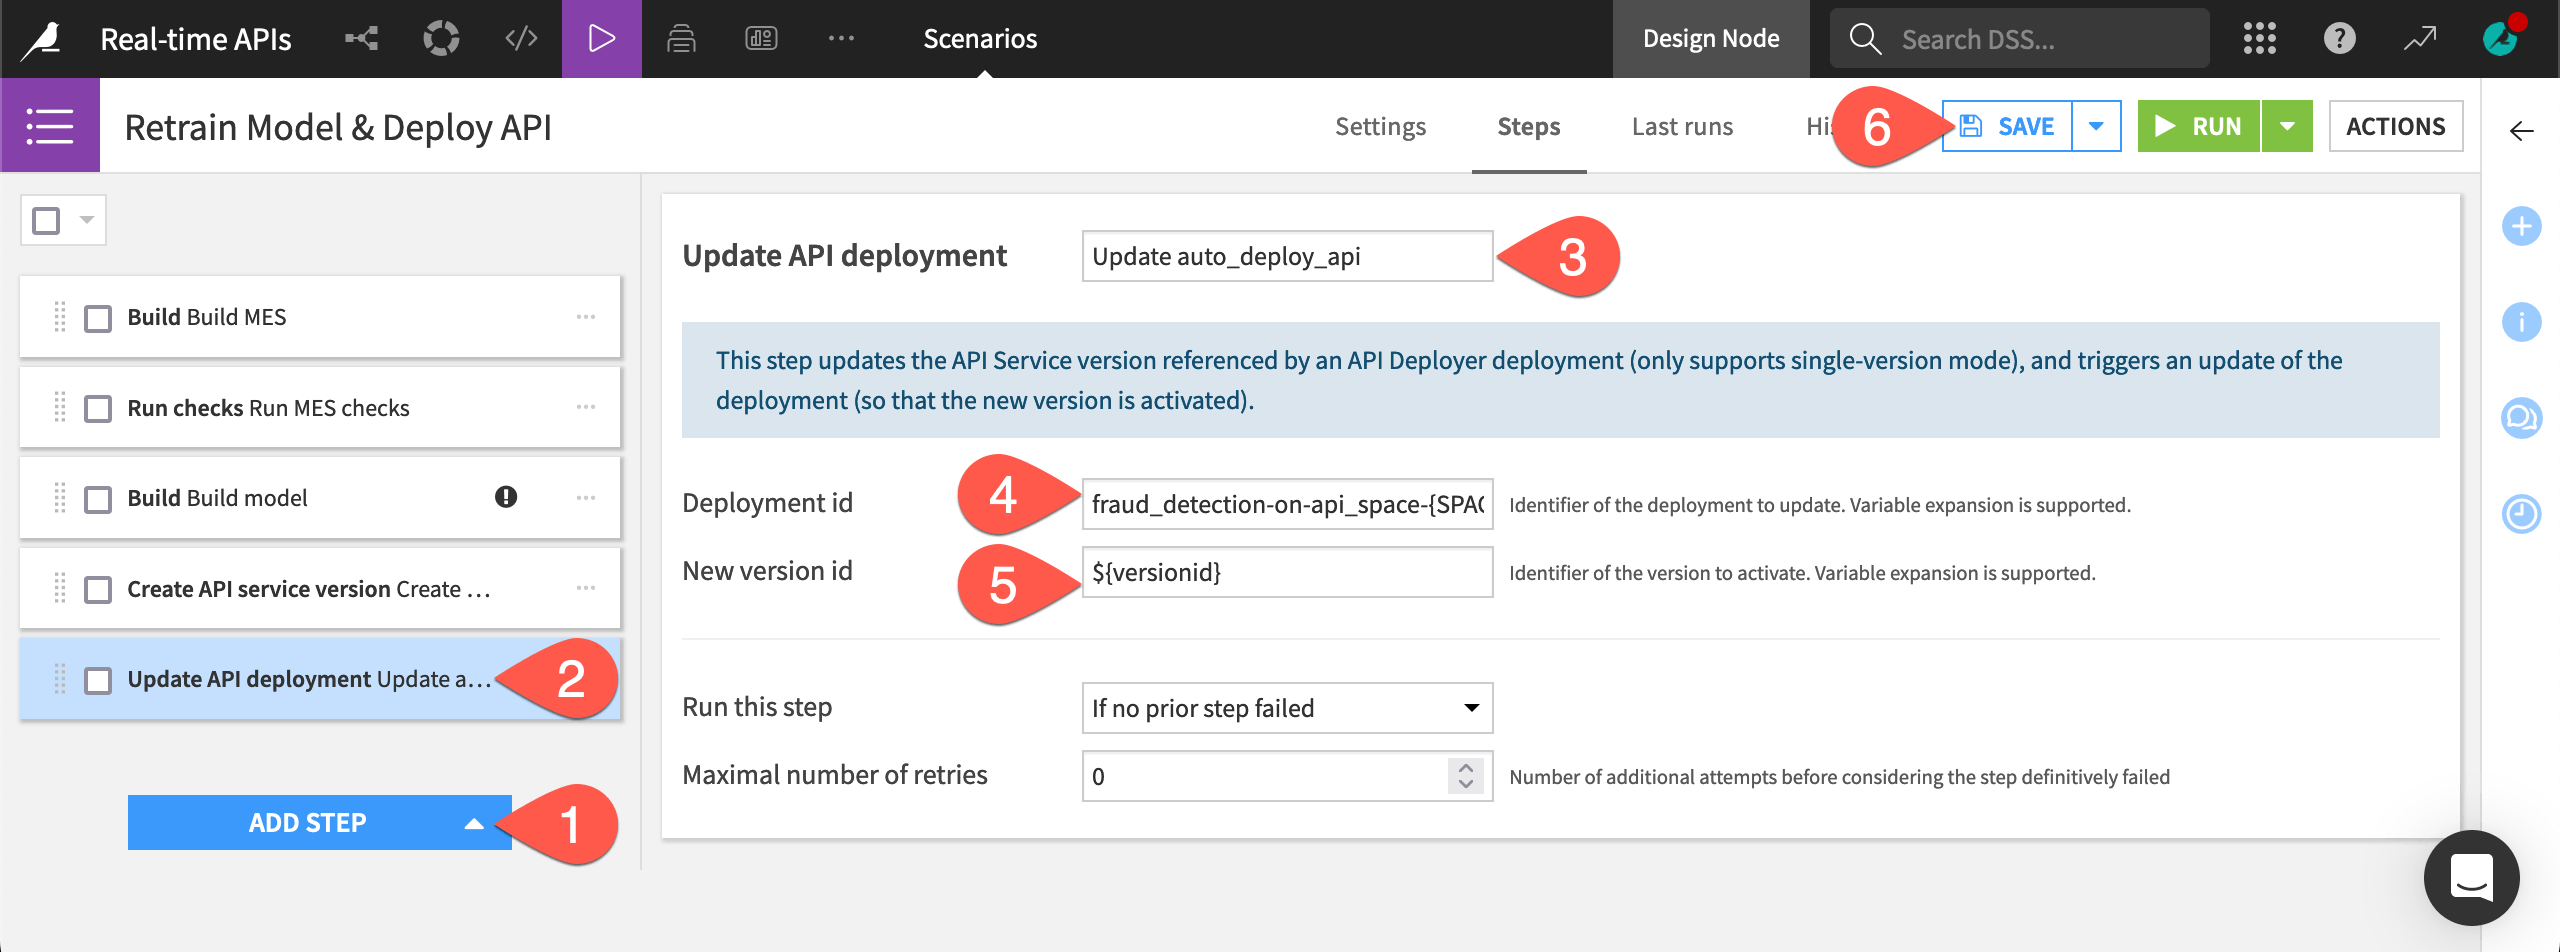 Add a scenario step to update the API deployment.